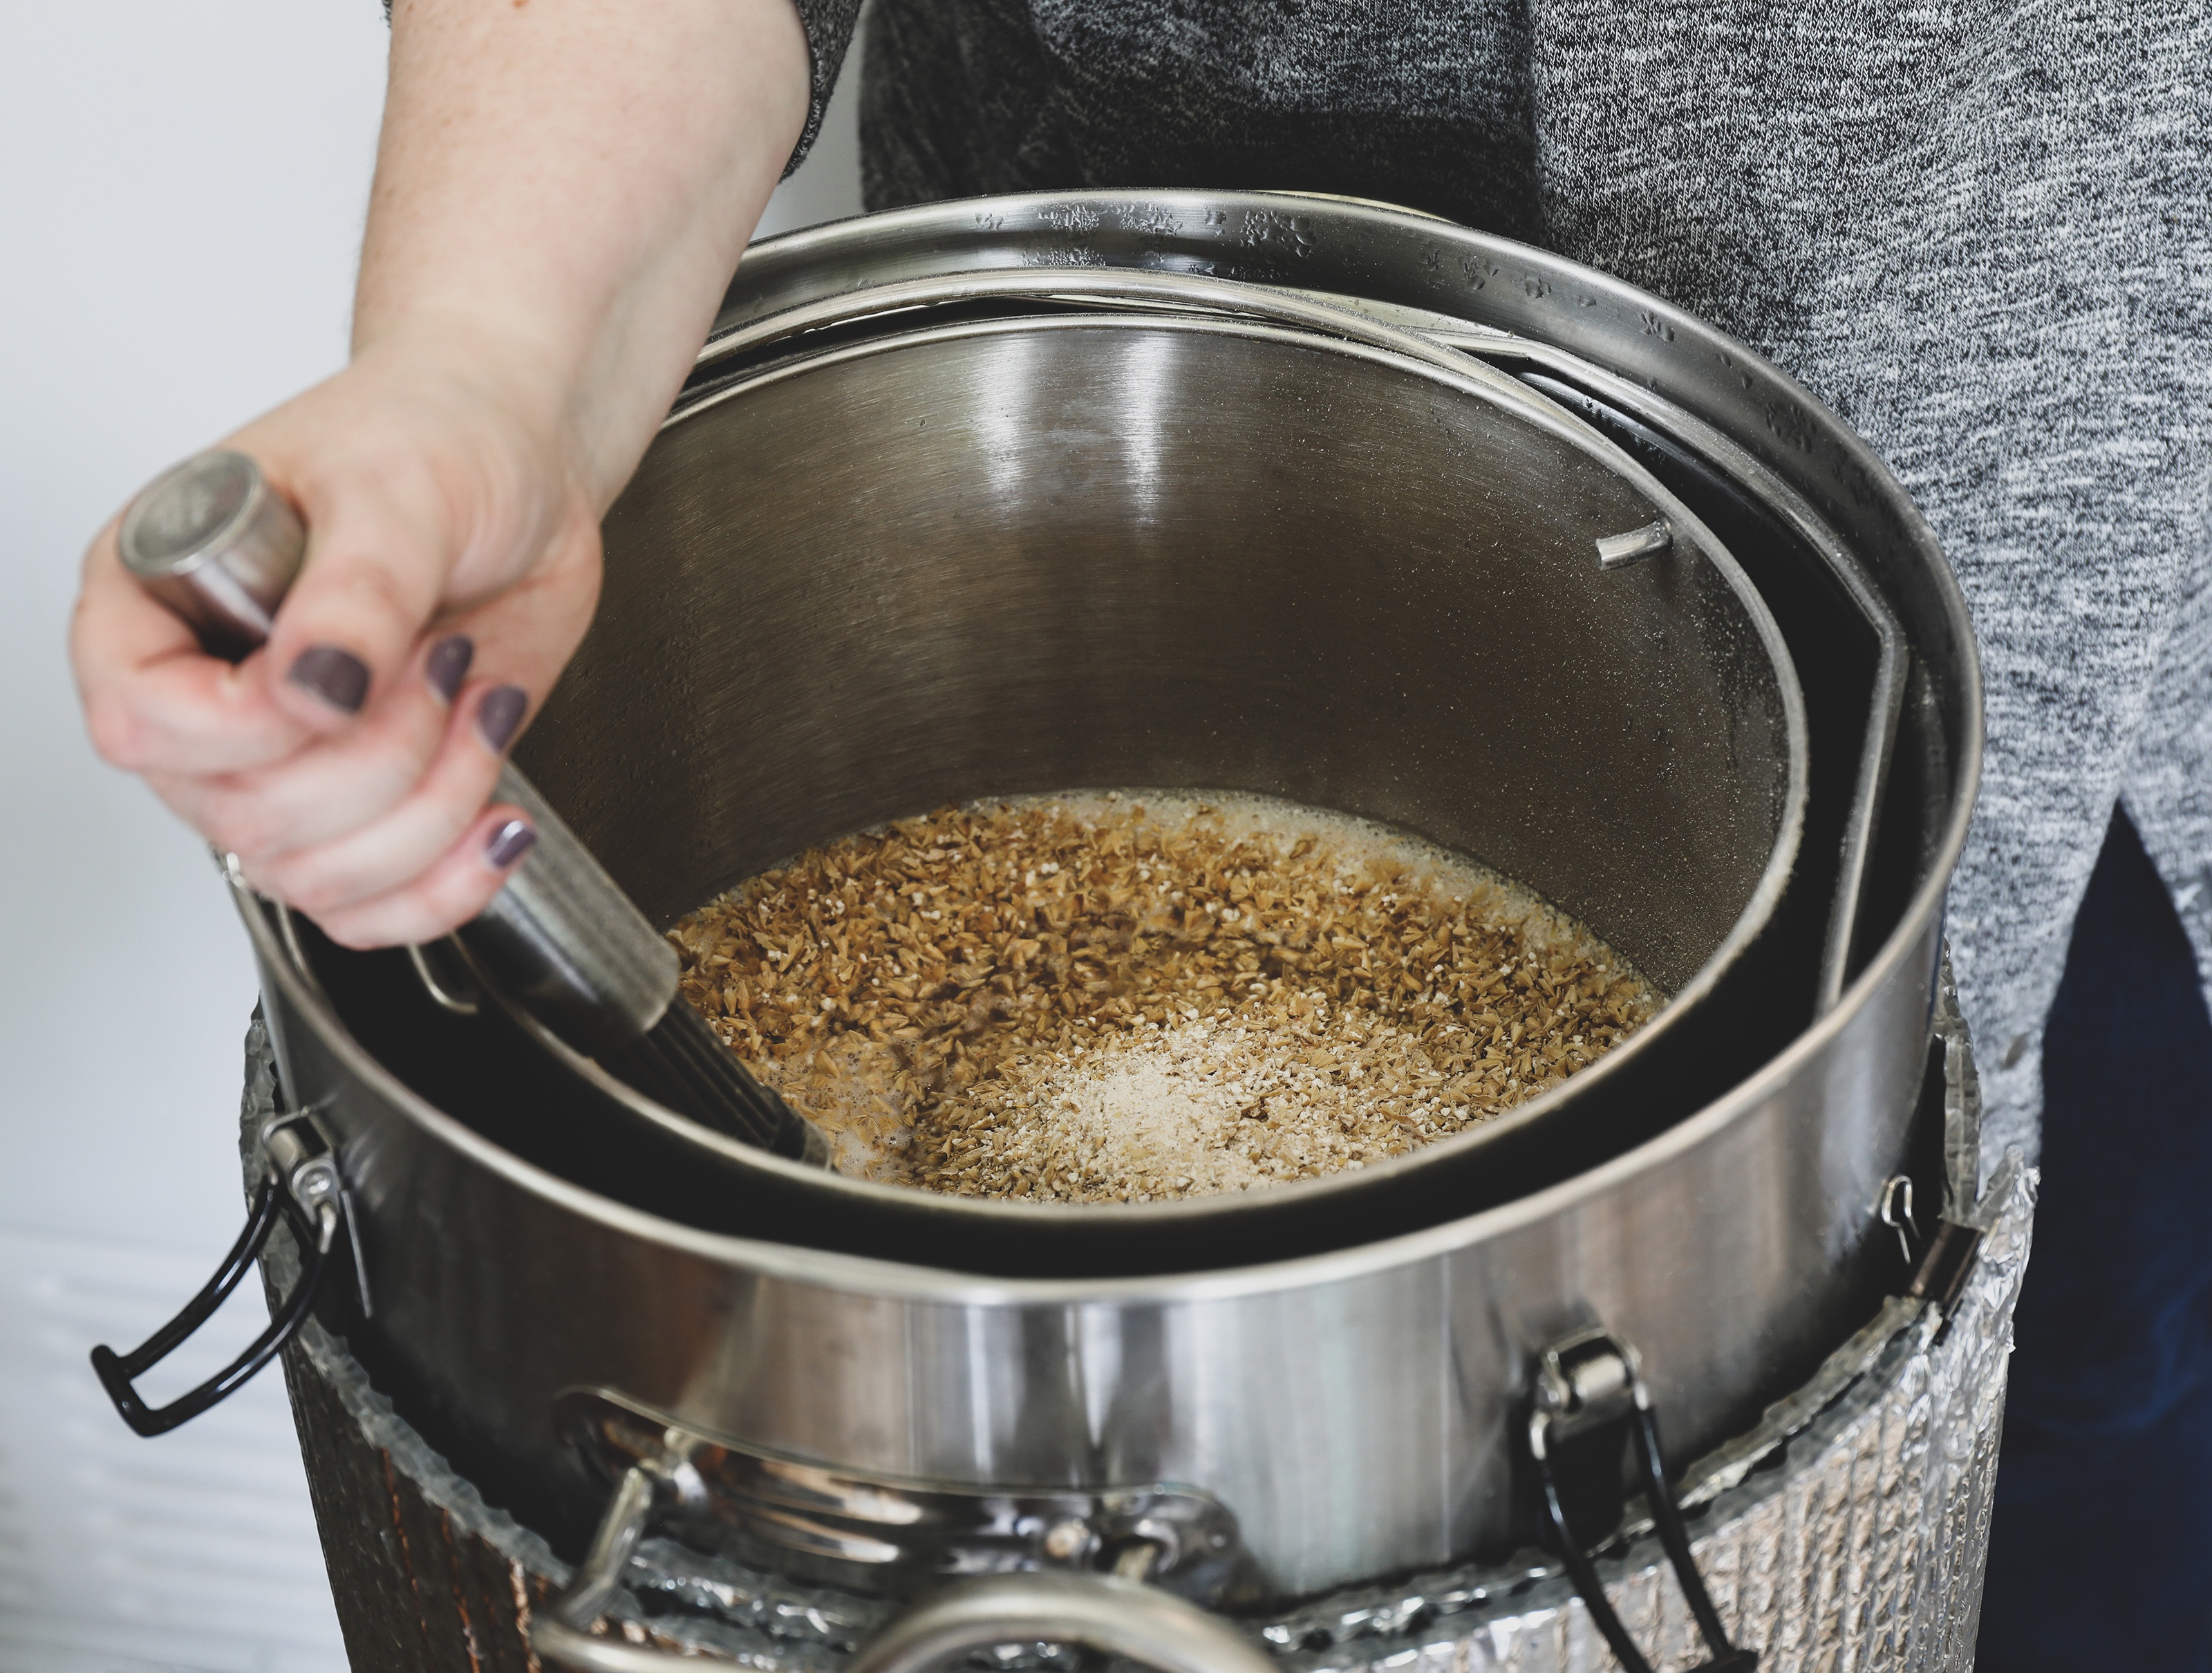 Hand stirring grain in pots with hot water for herbal beer brewing